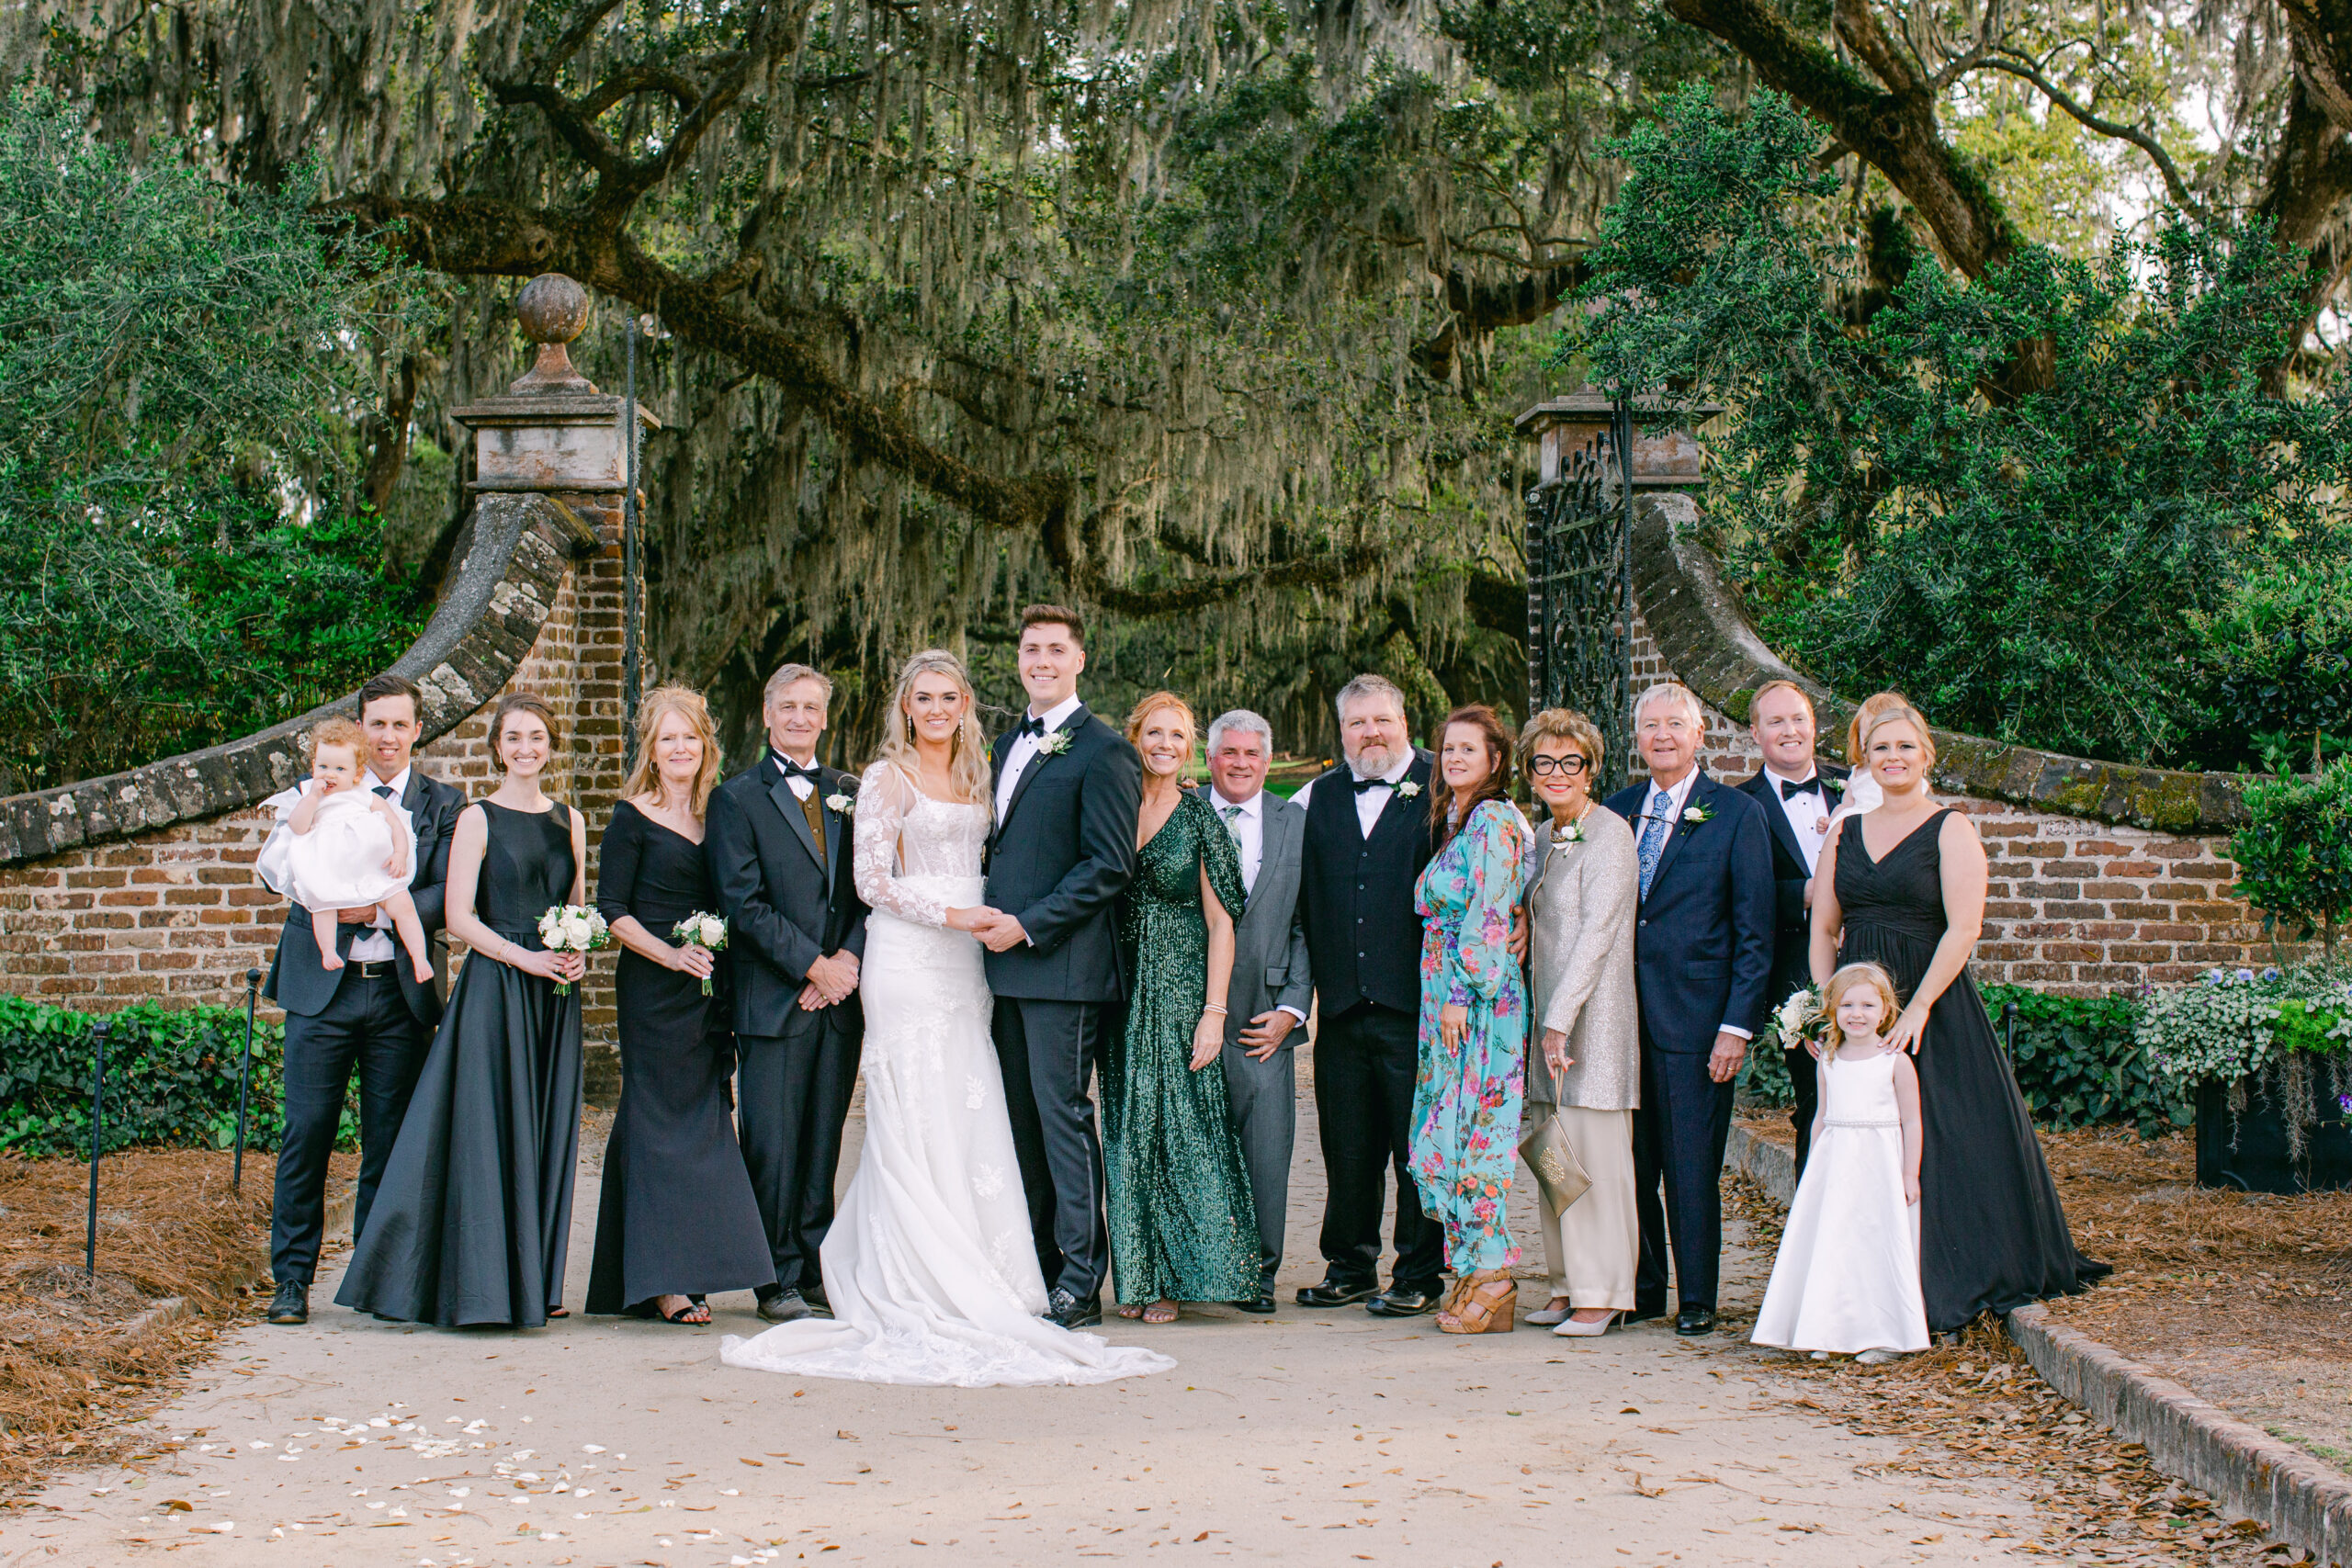 Family Picture taken of wedding couple at Boone Halle Plantation in Charleston, South Carolina